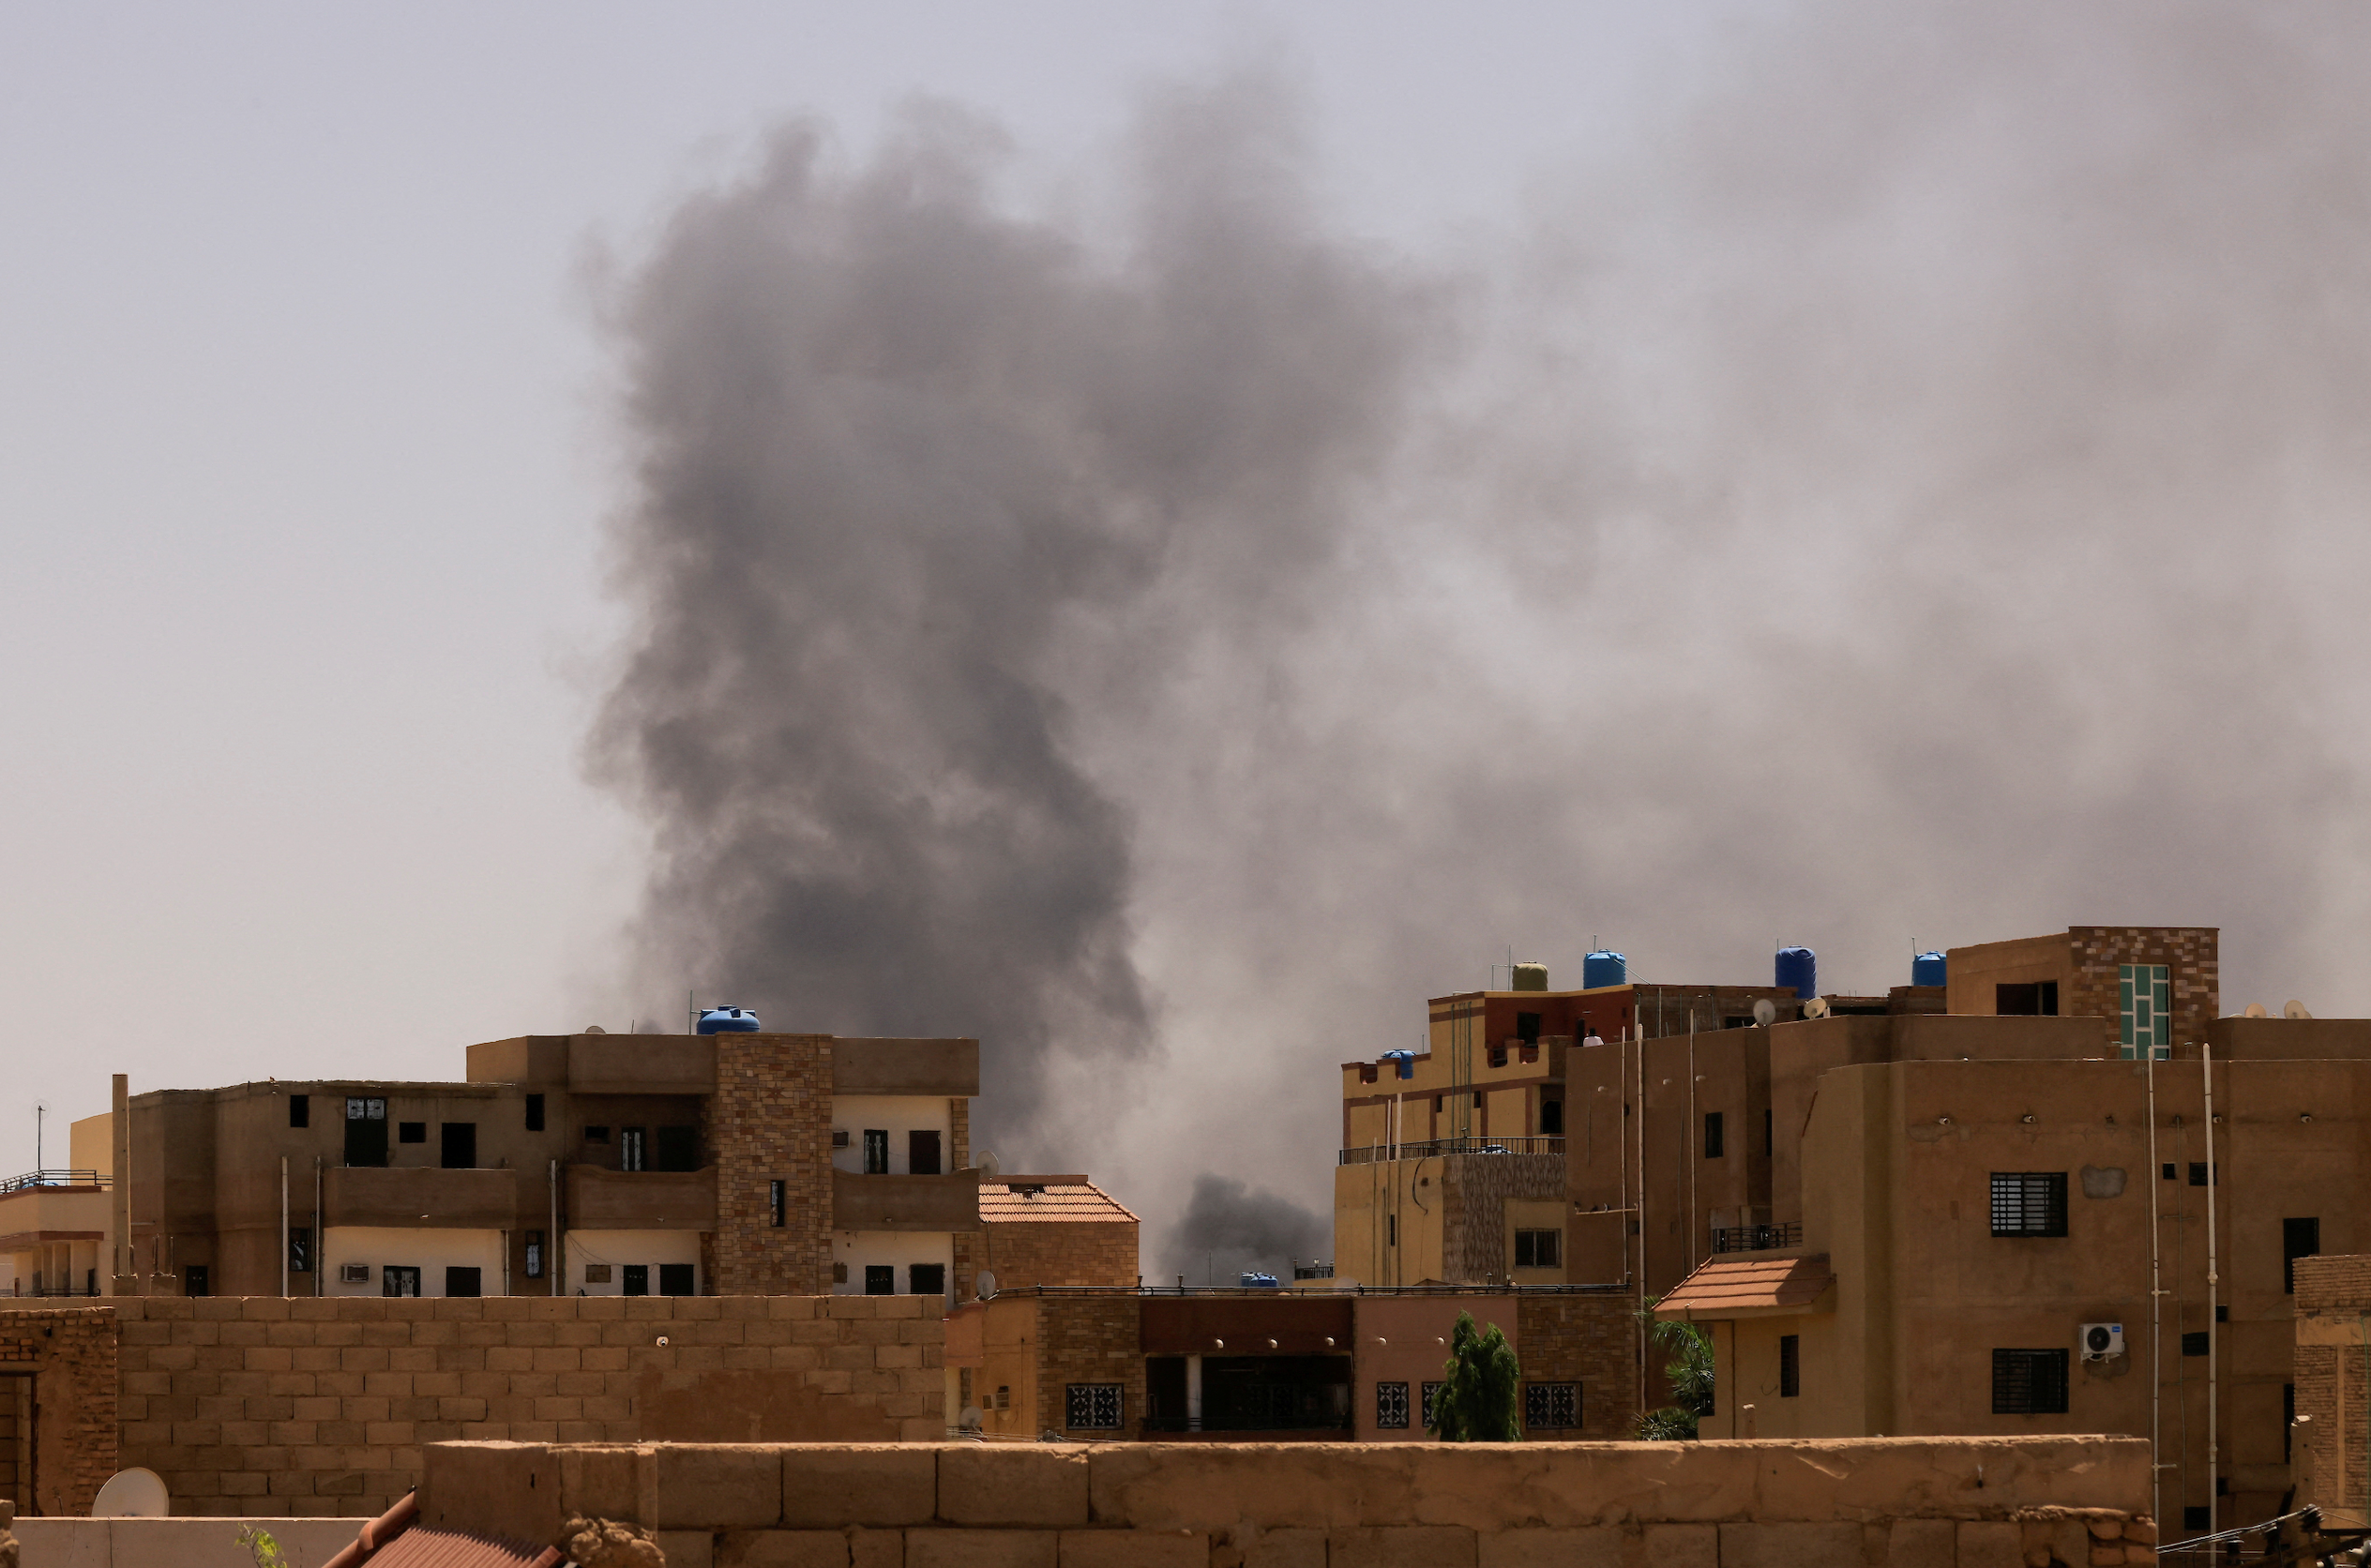 Smoke is seen rise from buildings during clashes between the paramilitary Rapid Support Forces and the army in Khartoum North, Sudan